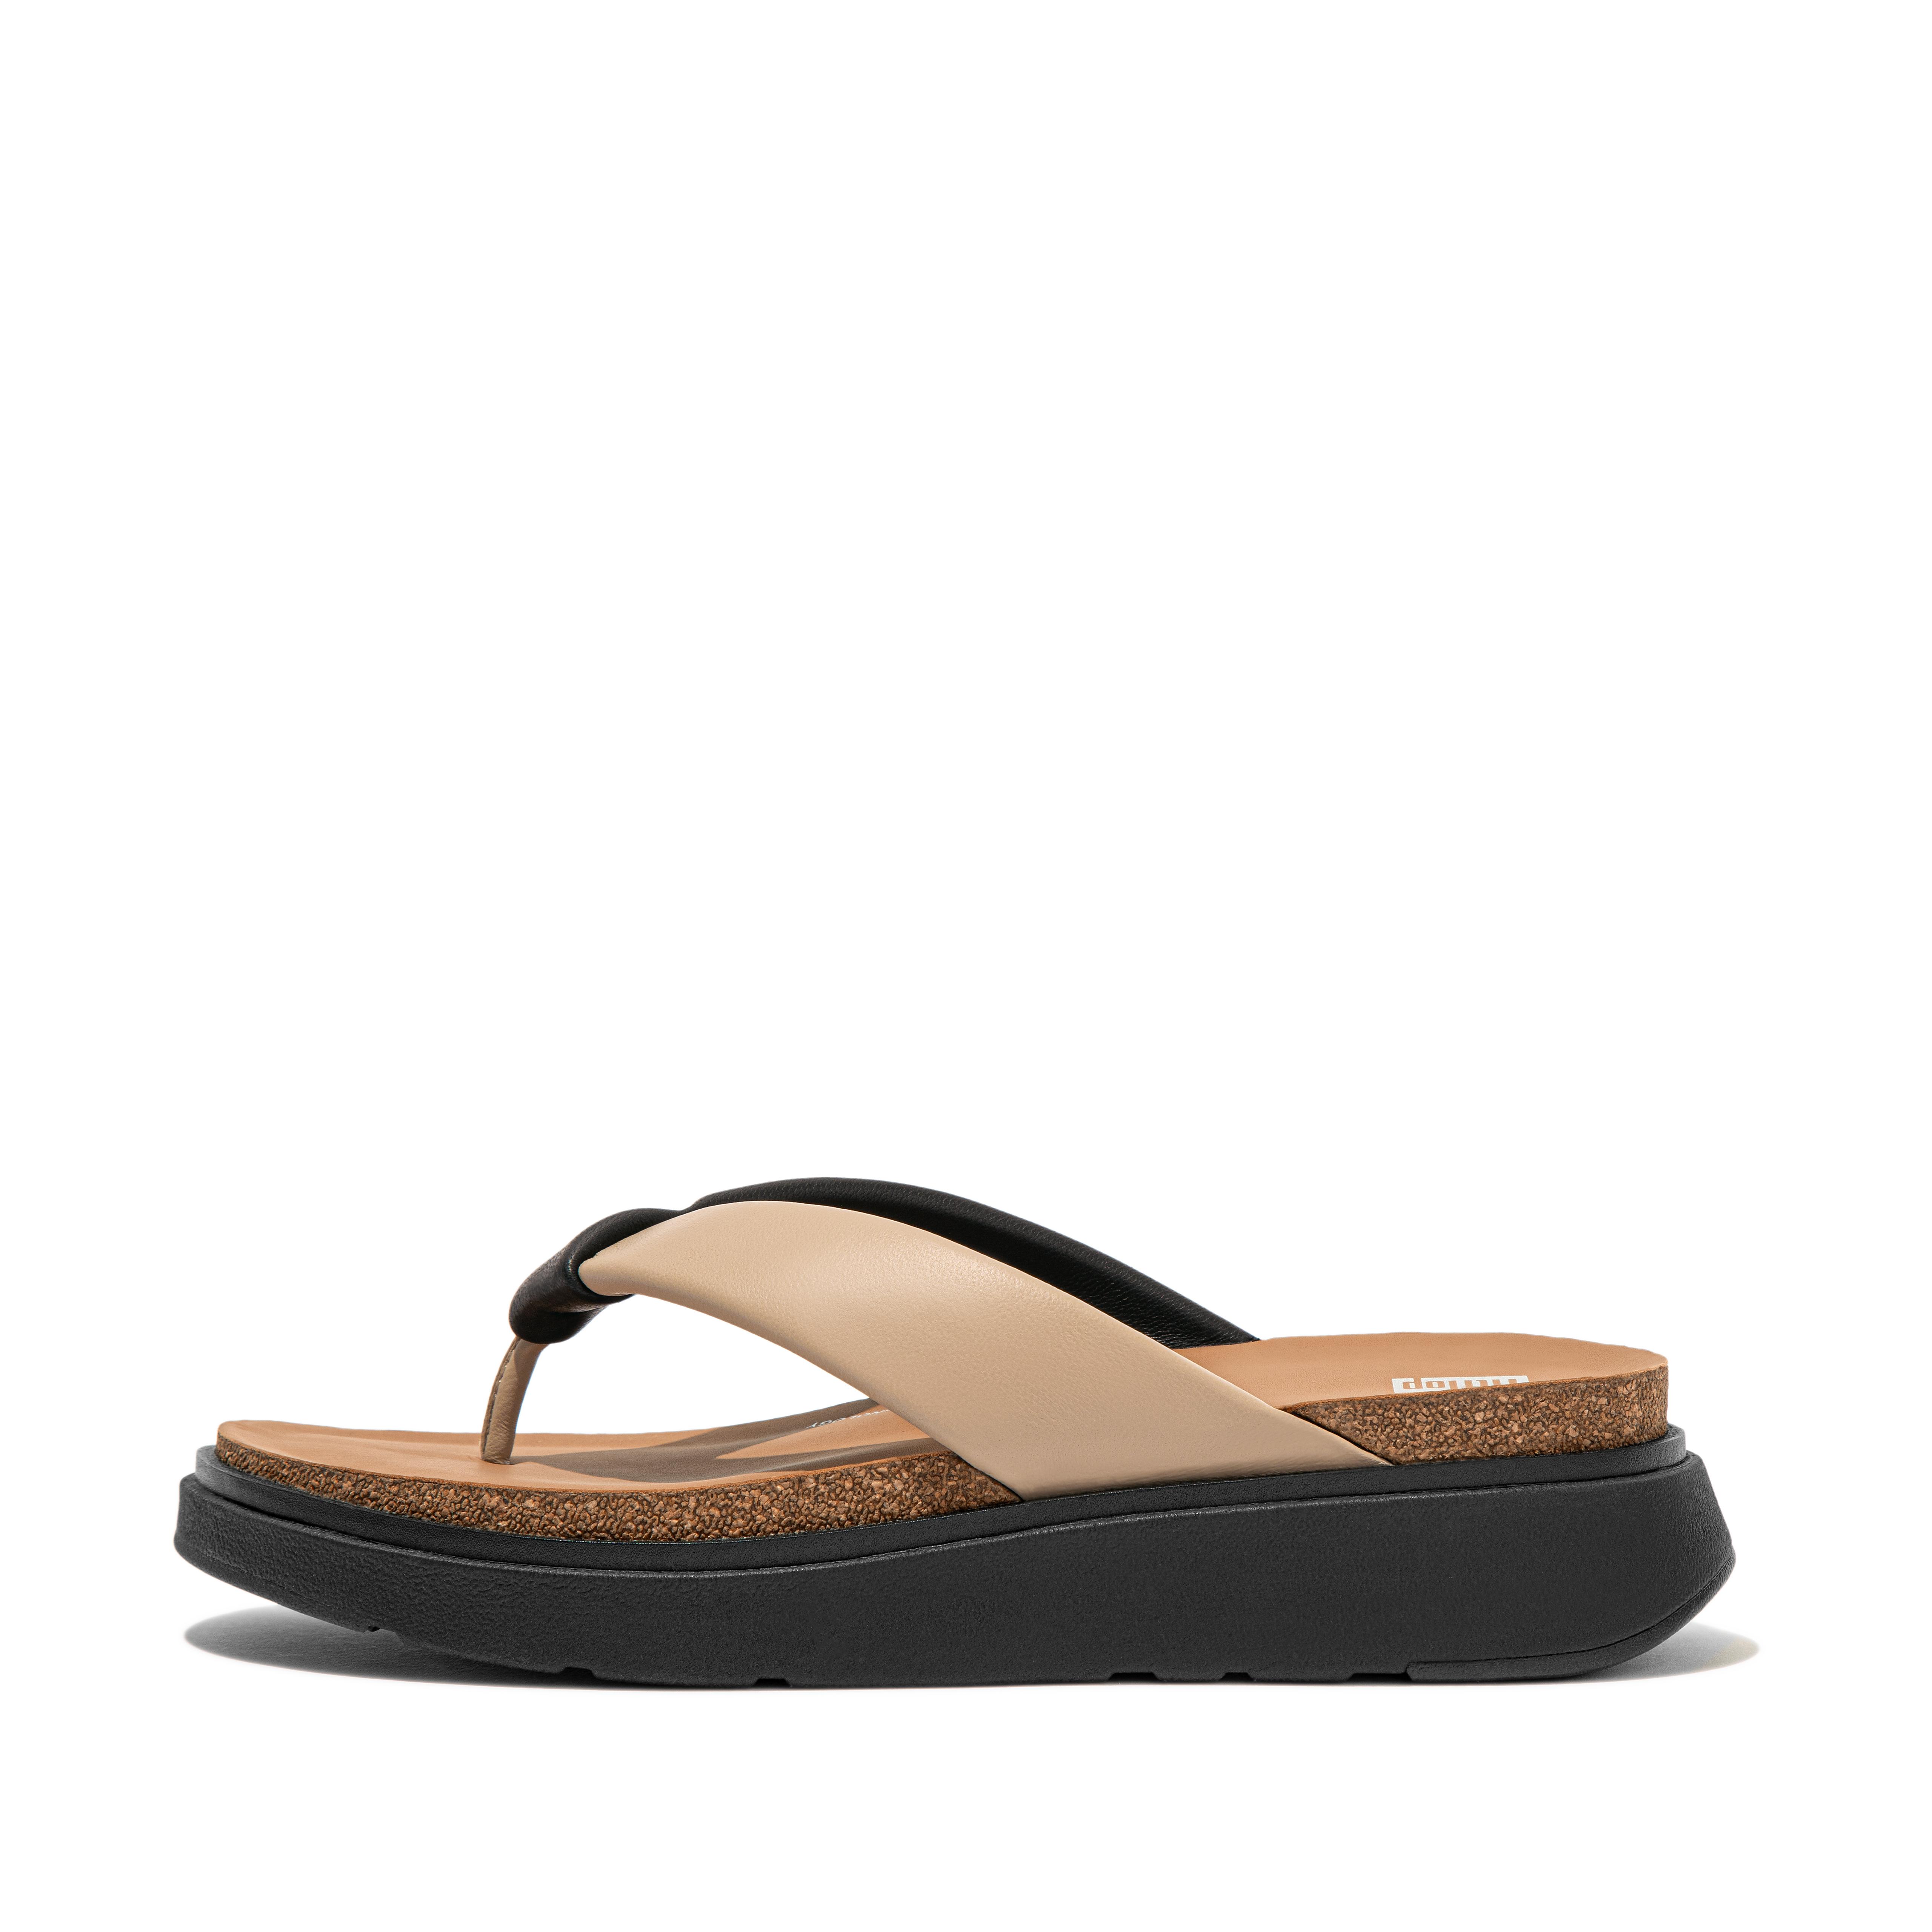 Fitflop Padded-Strap Leather Toe-Post Sandals,Latte Beige/Black